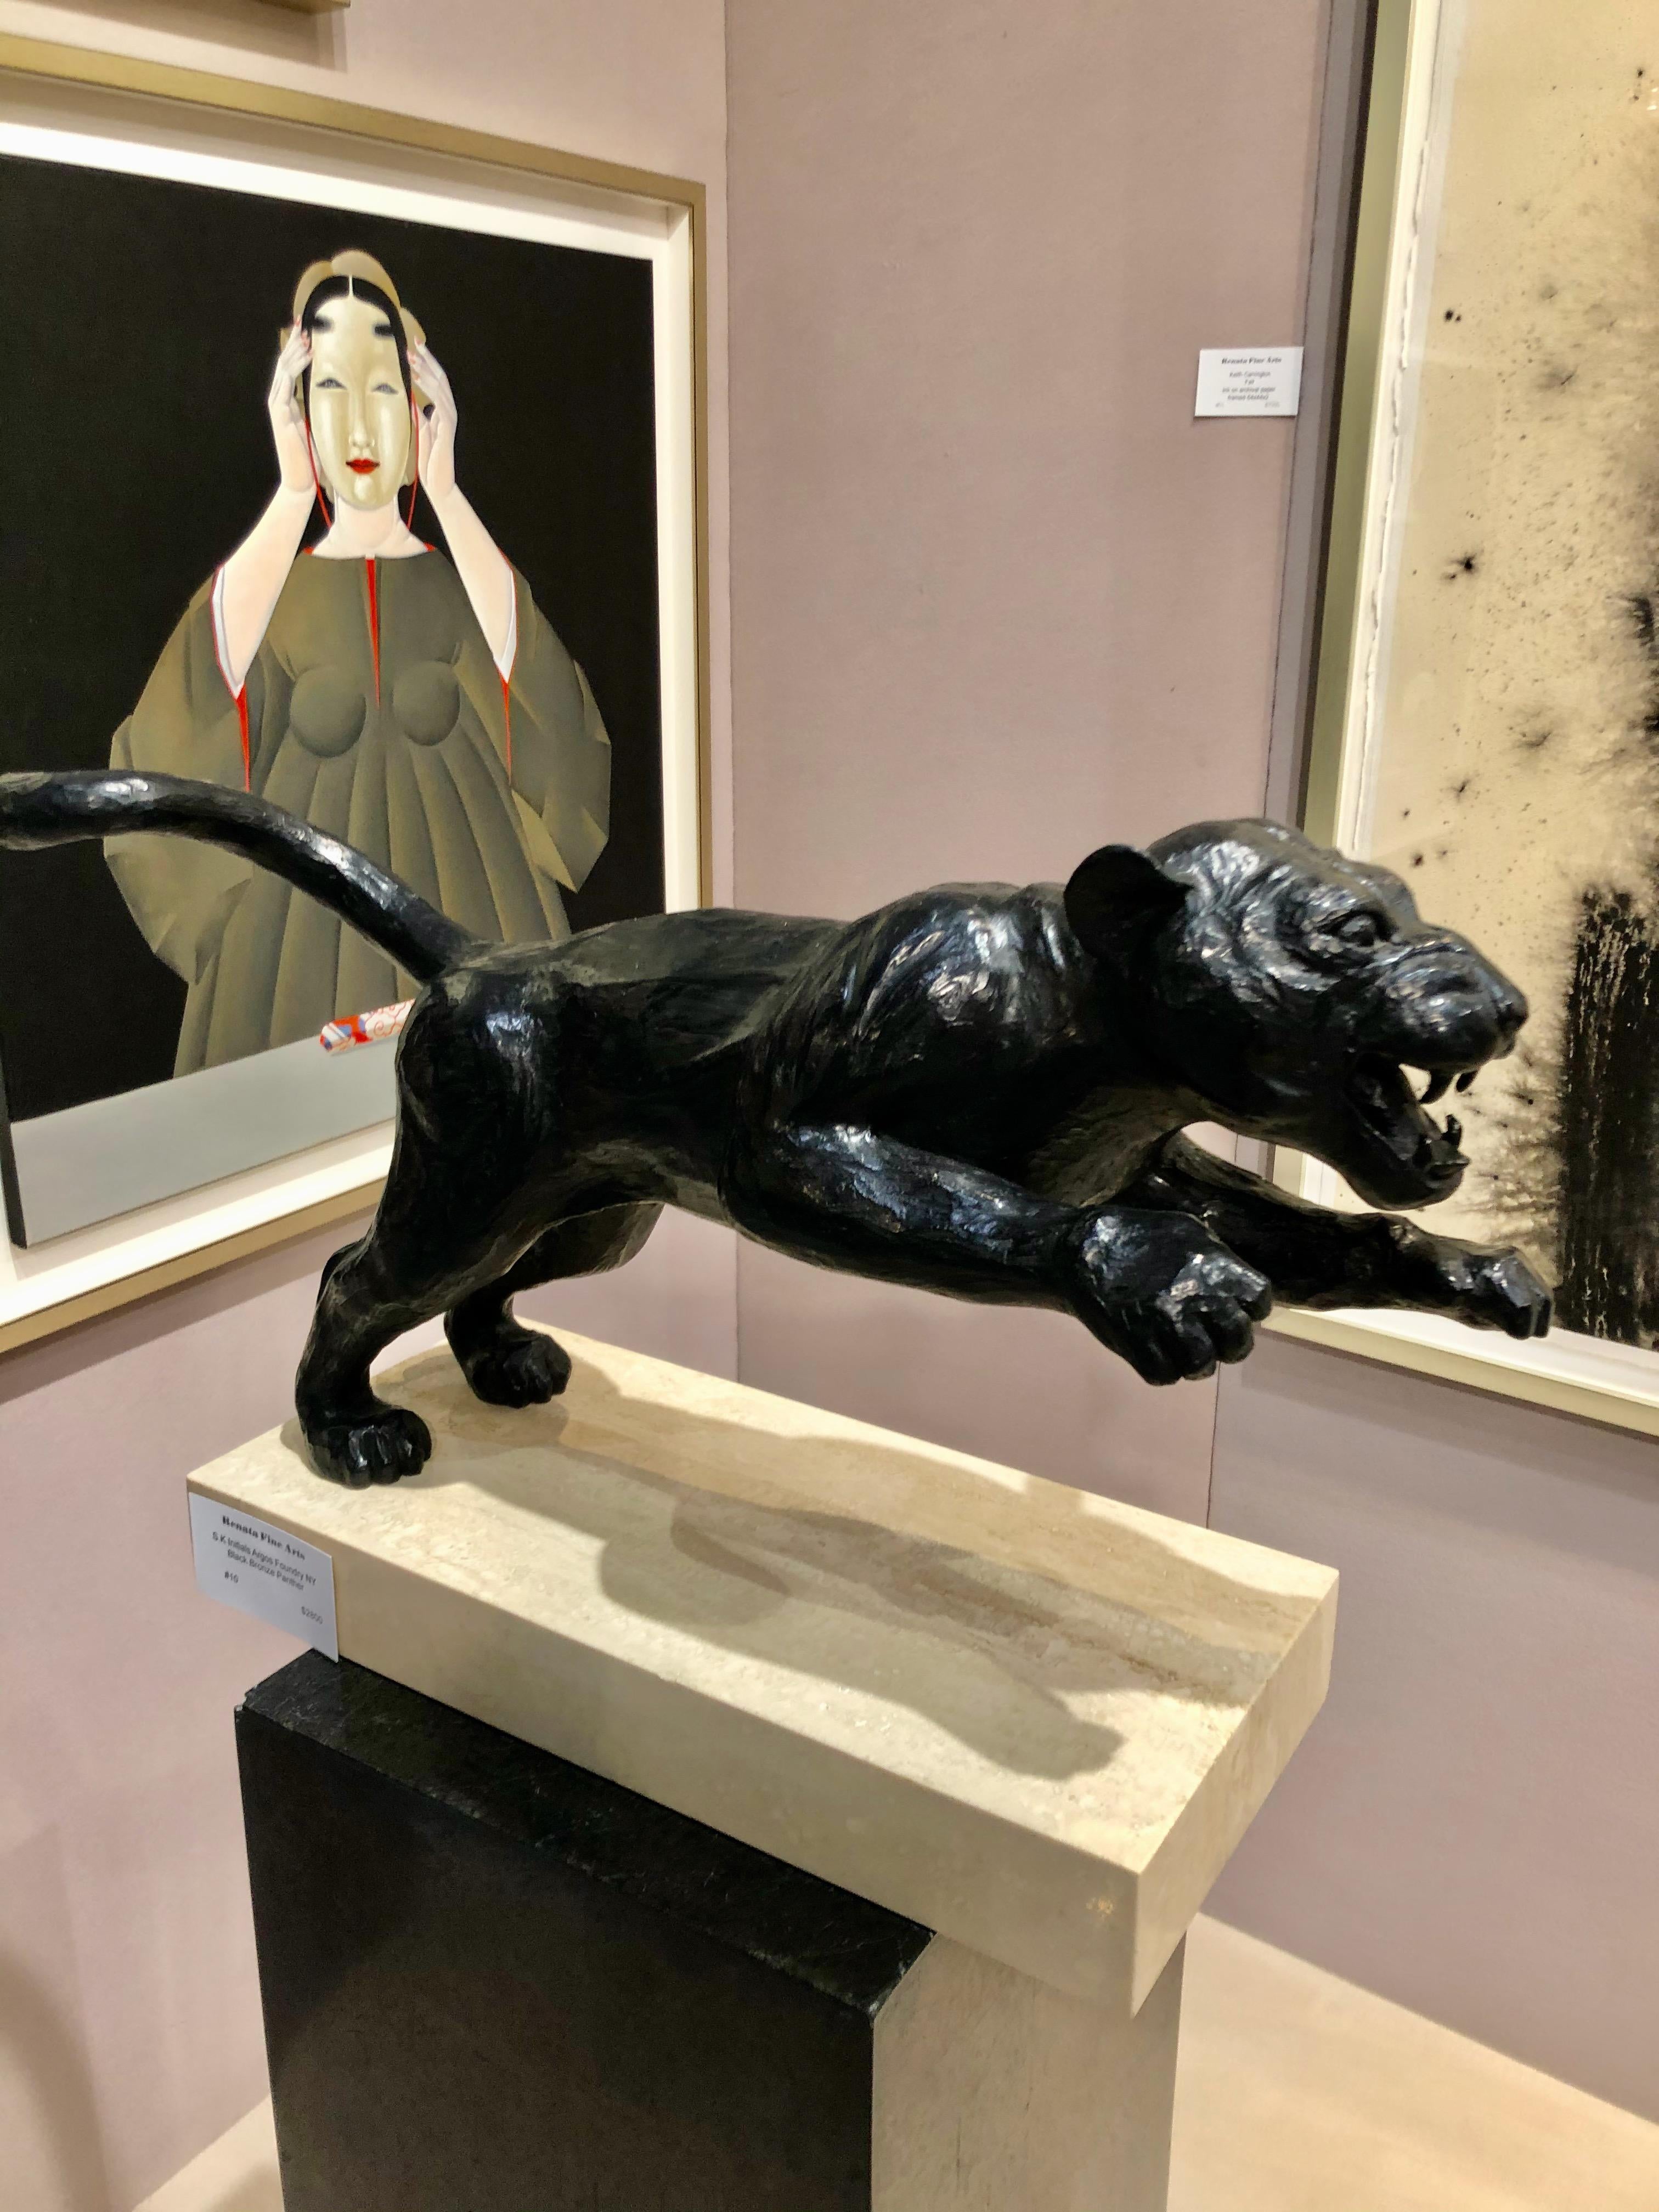  Panther Bronze Sculpture with black patina, signed with initials S. K. Argos Foundry on beige travertine stone.
Wonderful quality casting Modern bronze sculpture, Argos Foundry was established in the 1980s in Brewster NY.